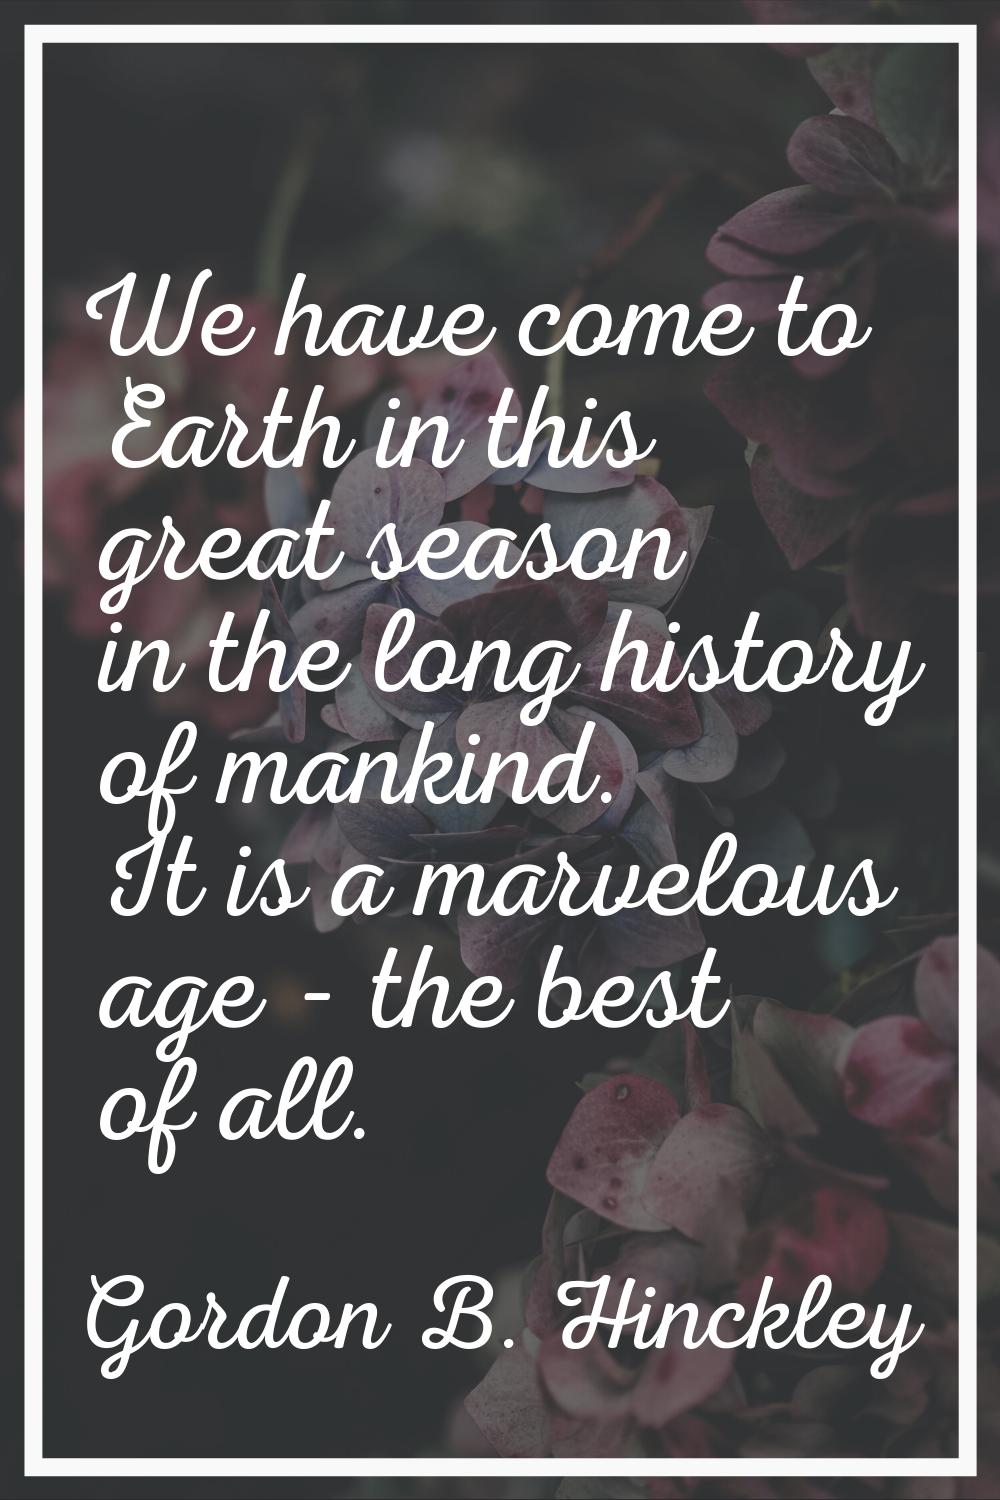 We have come to Earth in this great season in the long history of mankind. It is a marvelous age - 